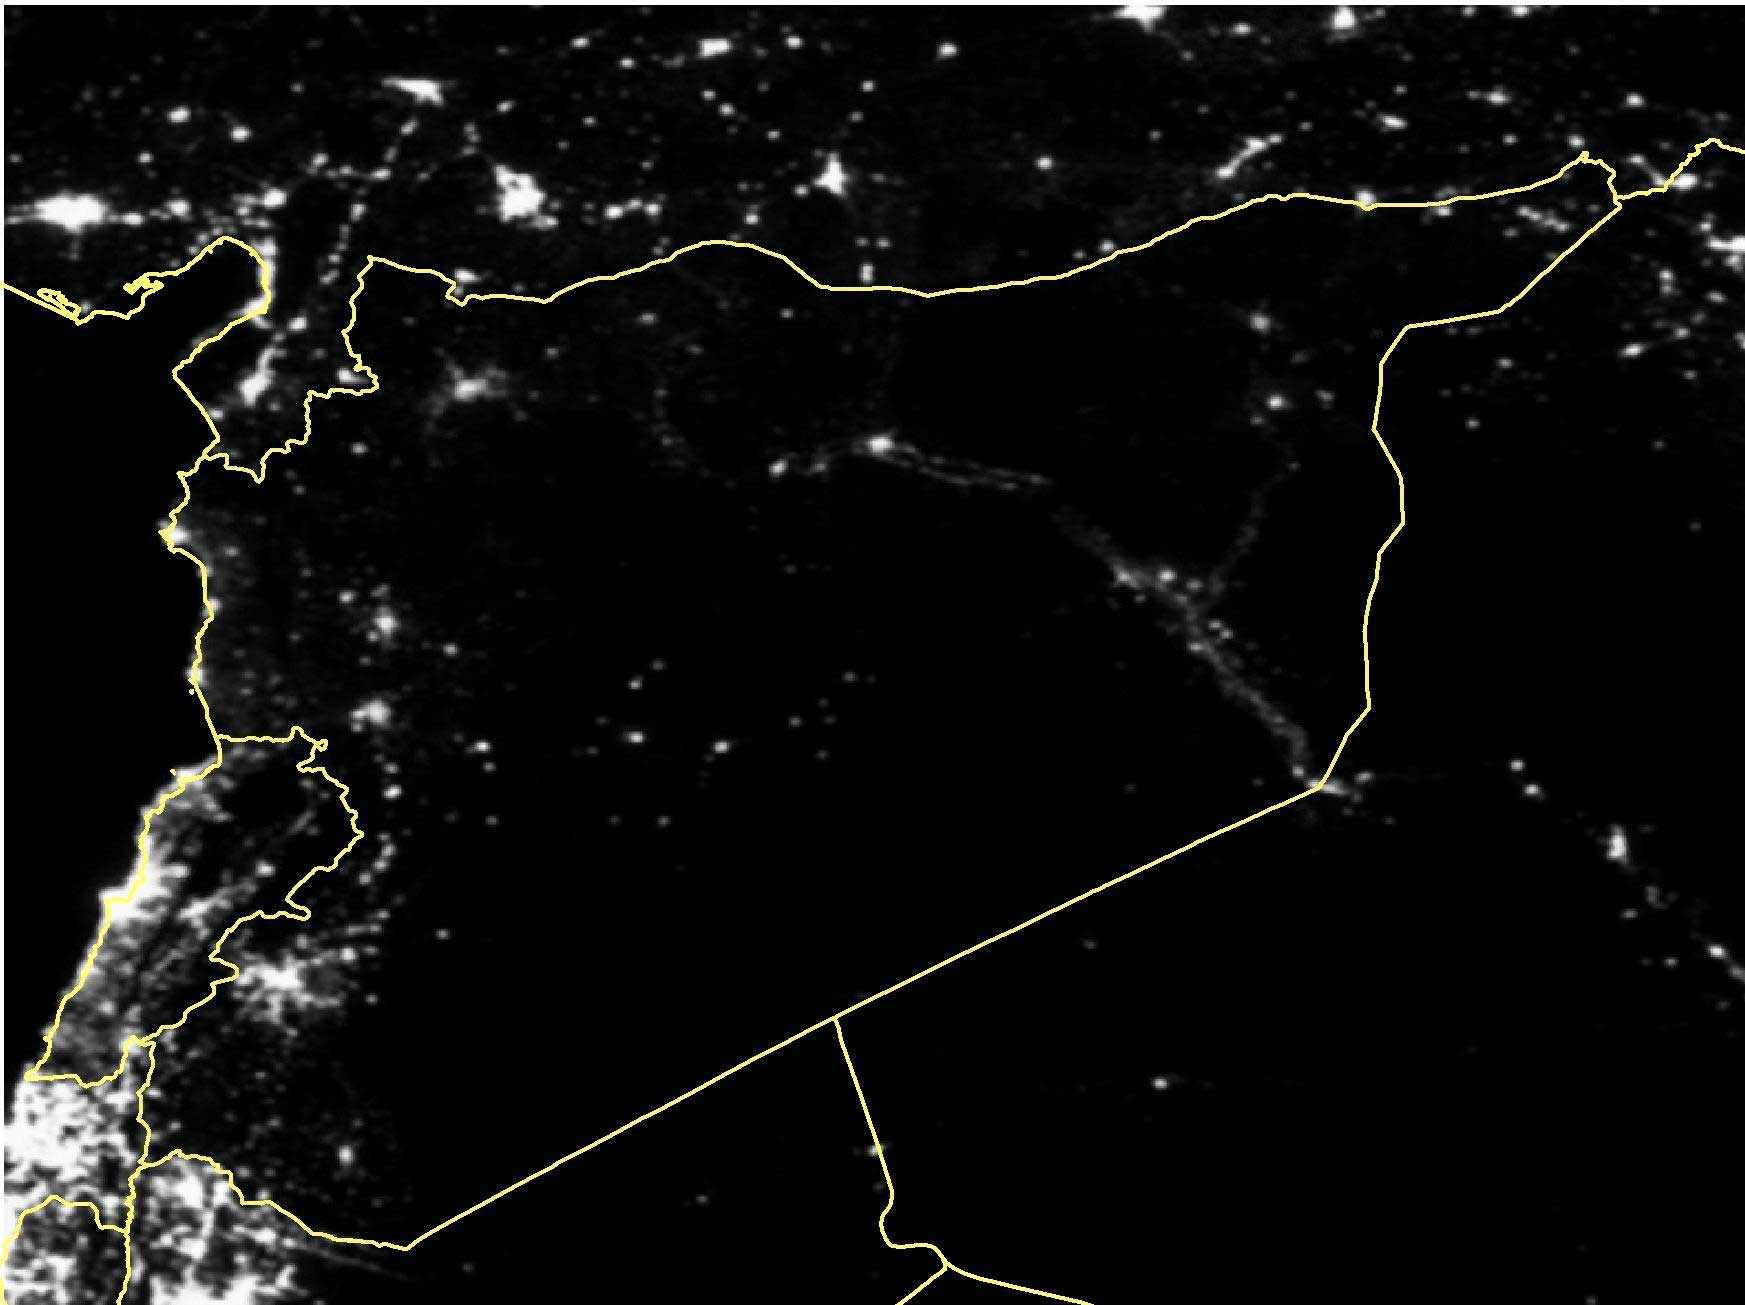 Satellite imagery of Syria in March 2013.